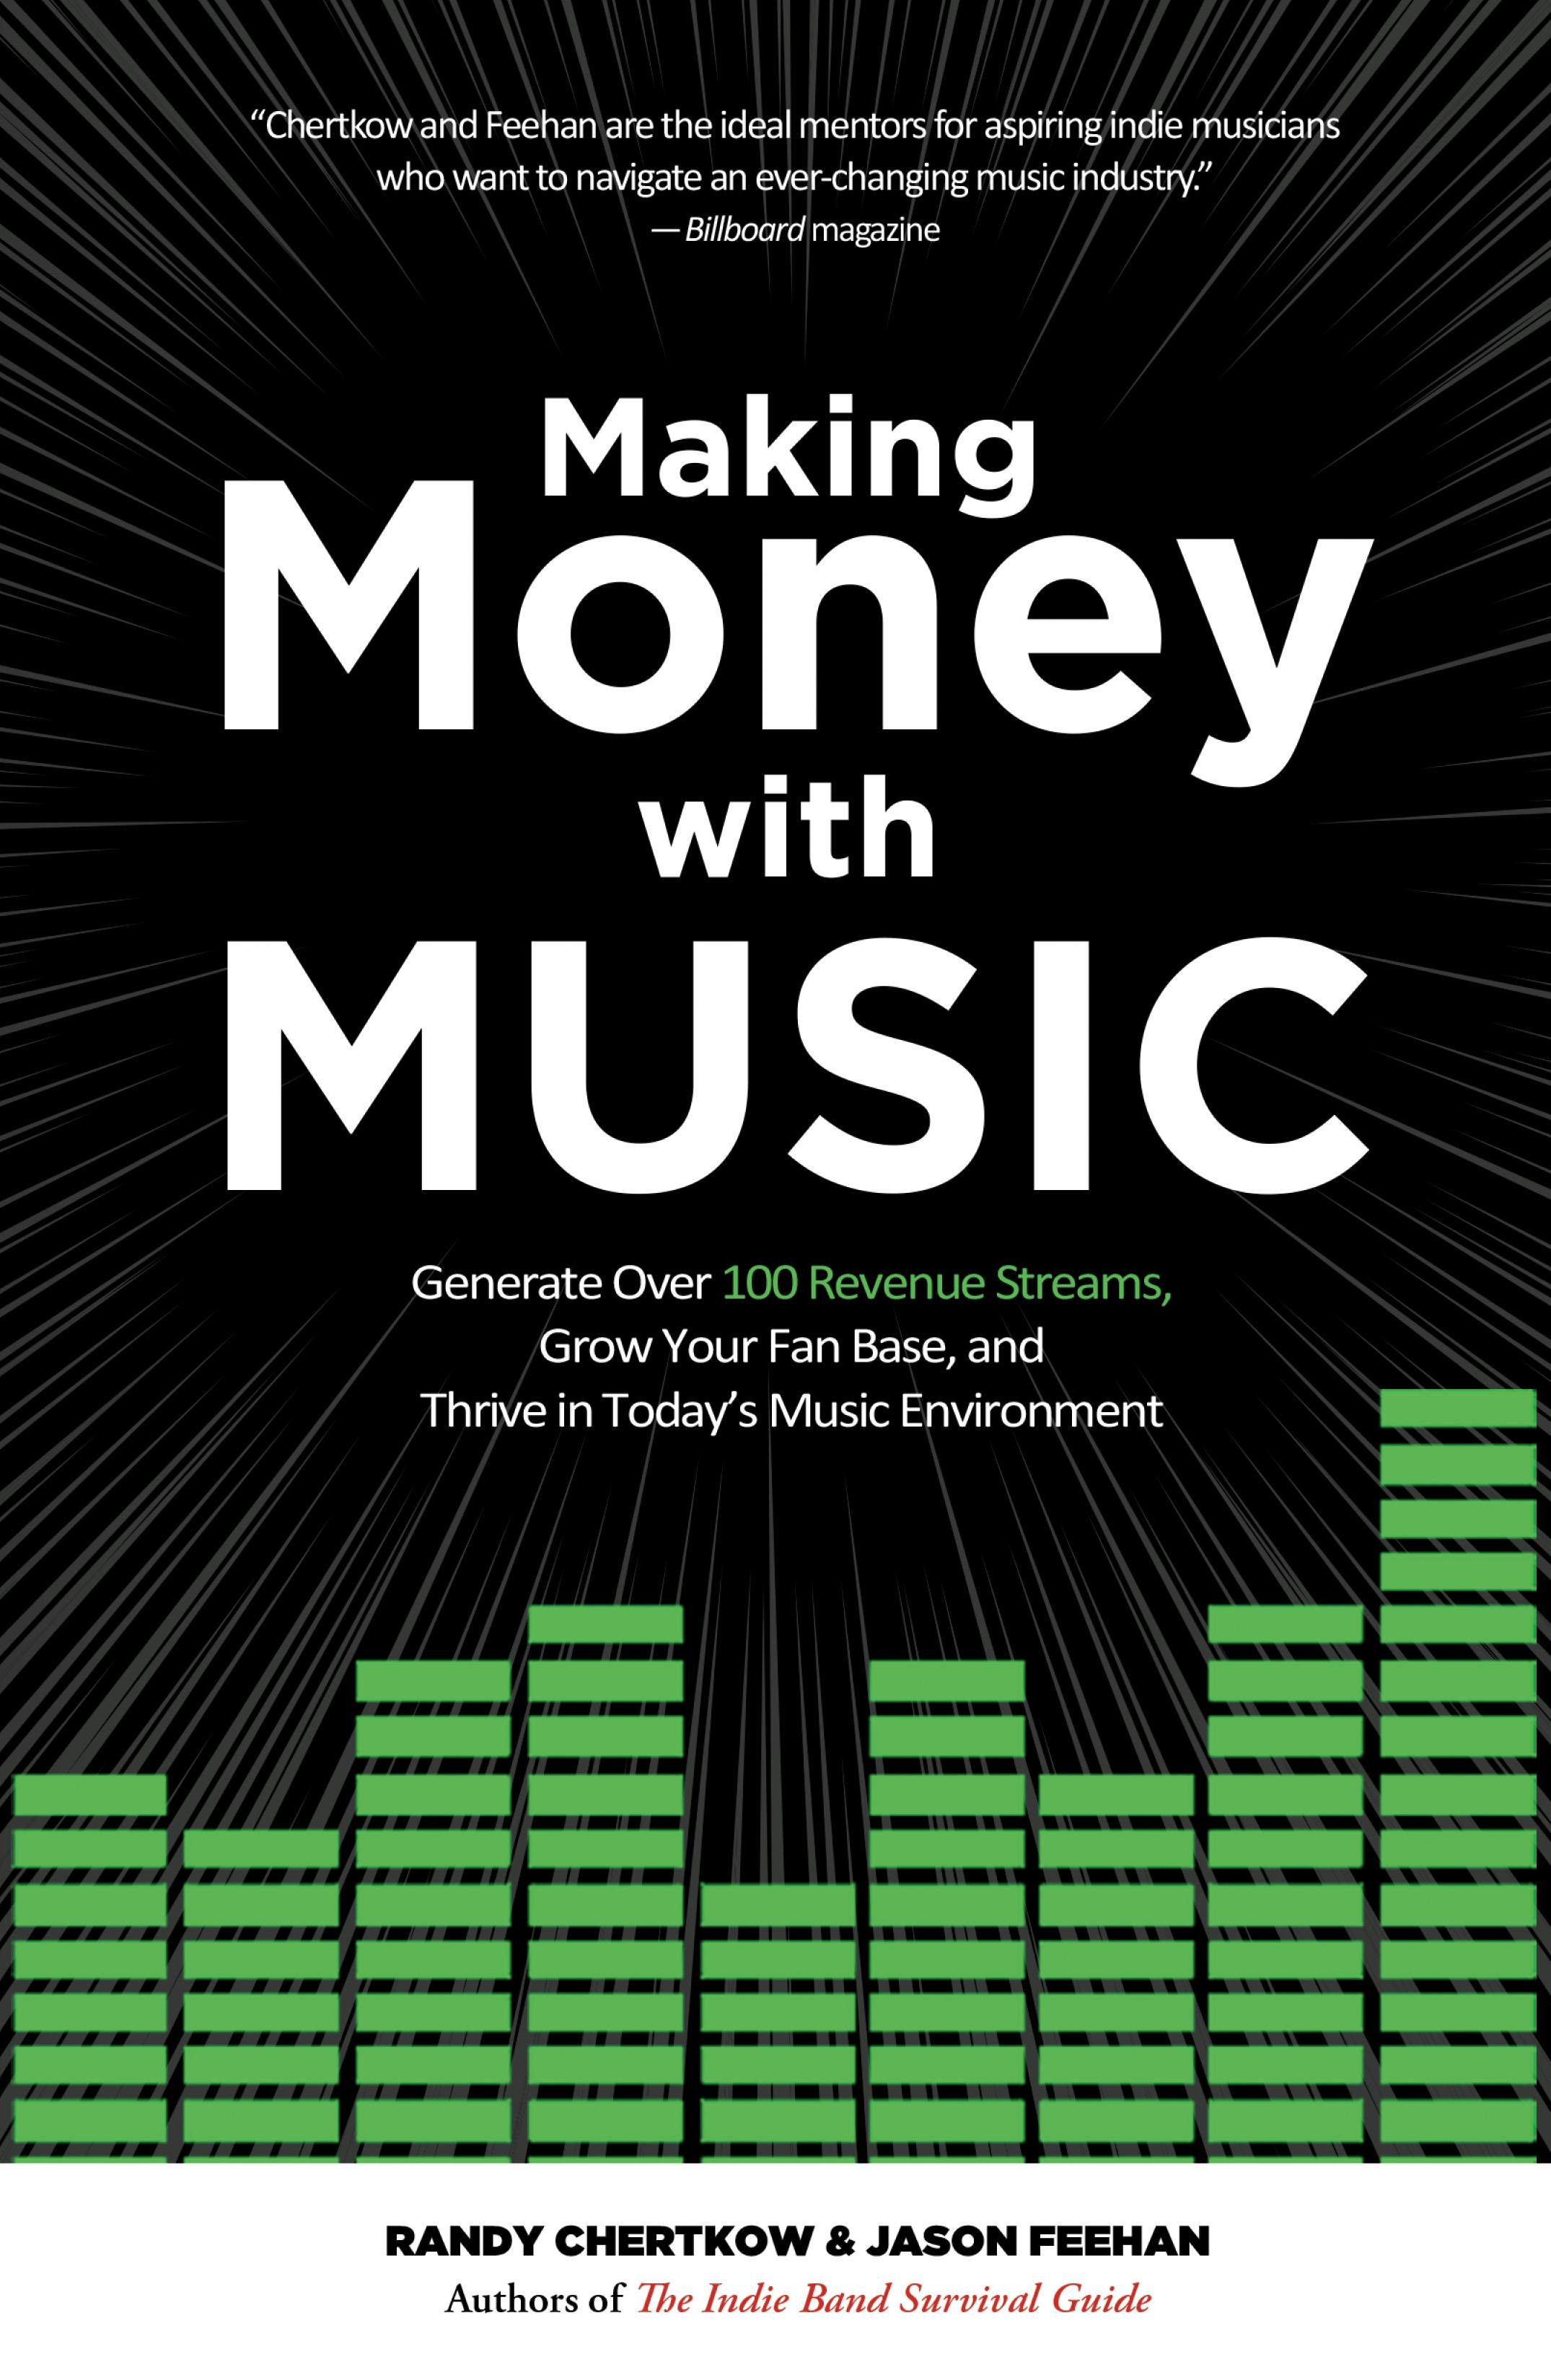 How To Make Money On : A Guide for Music Artists - AK Records